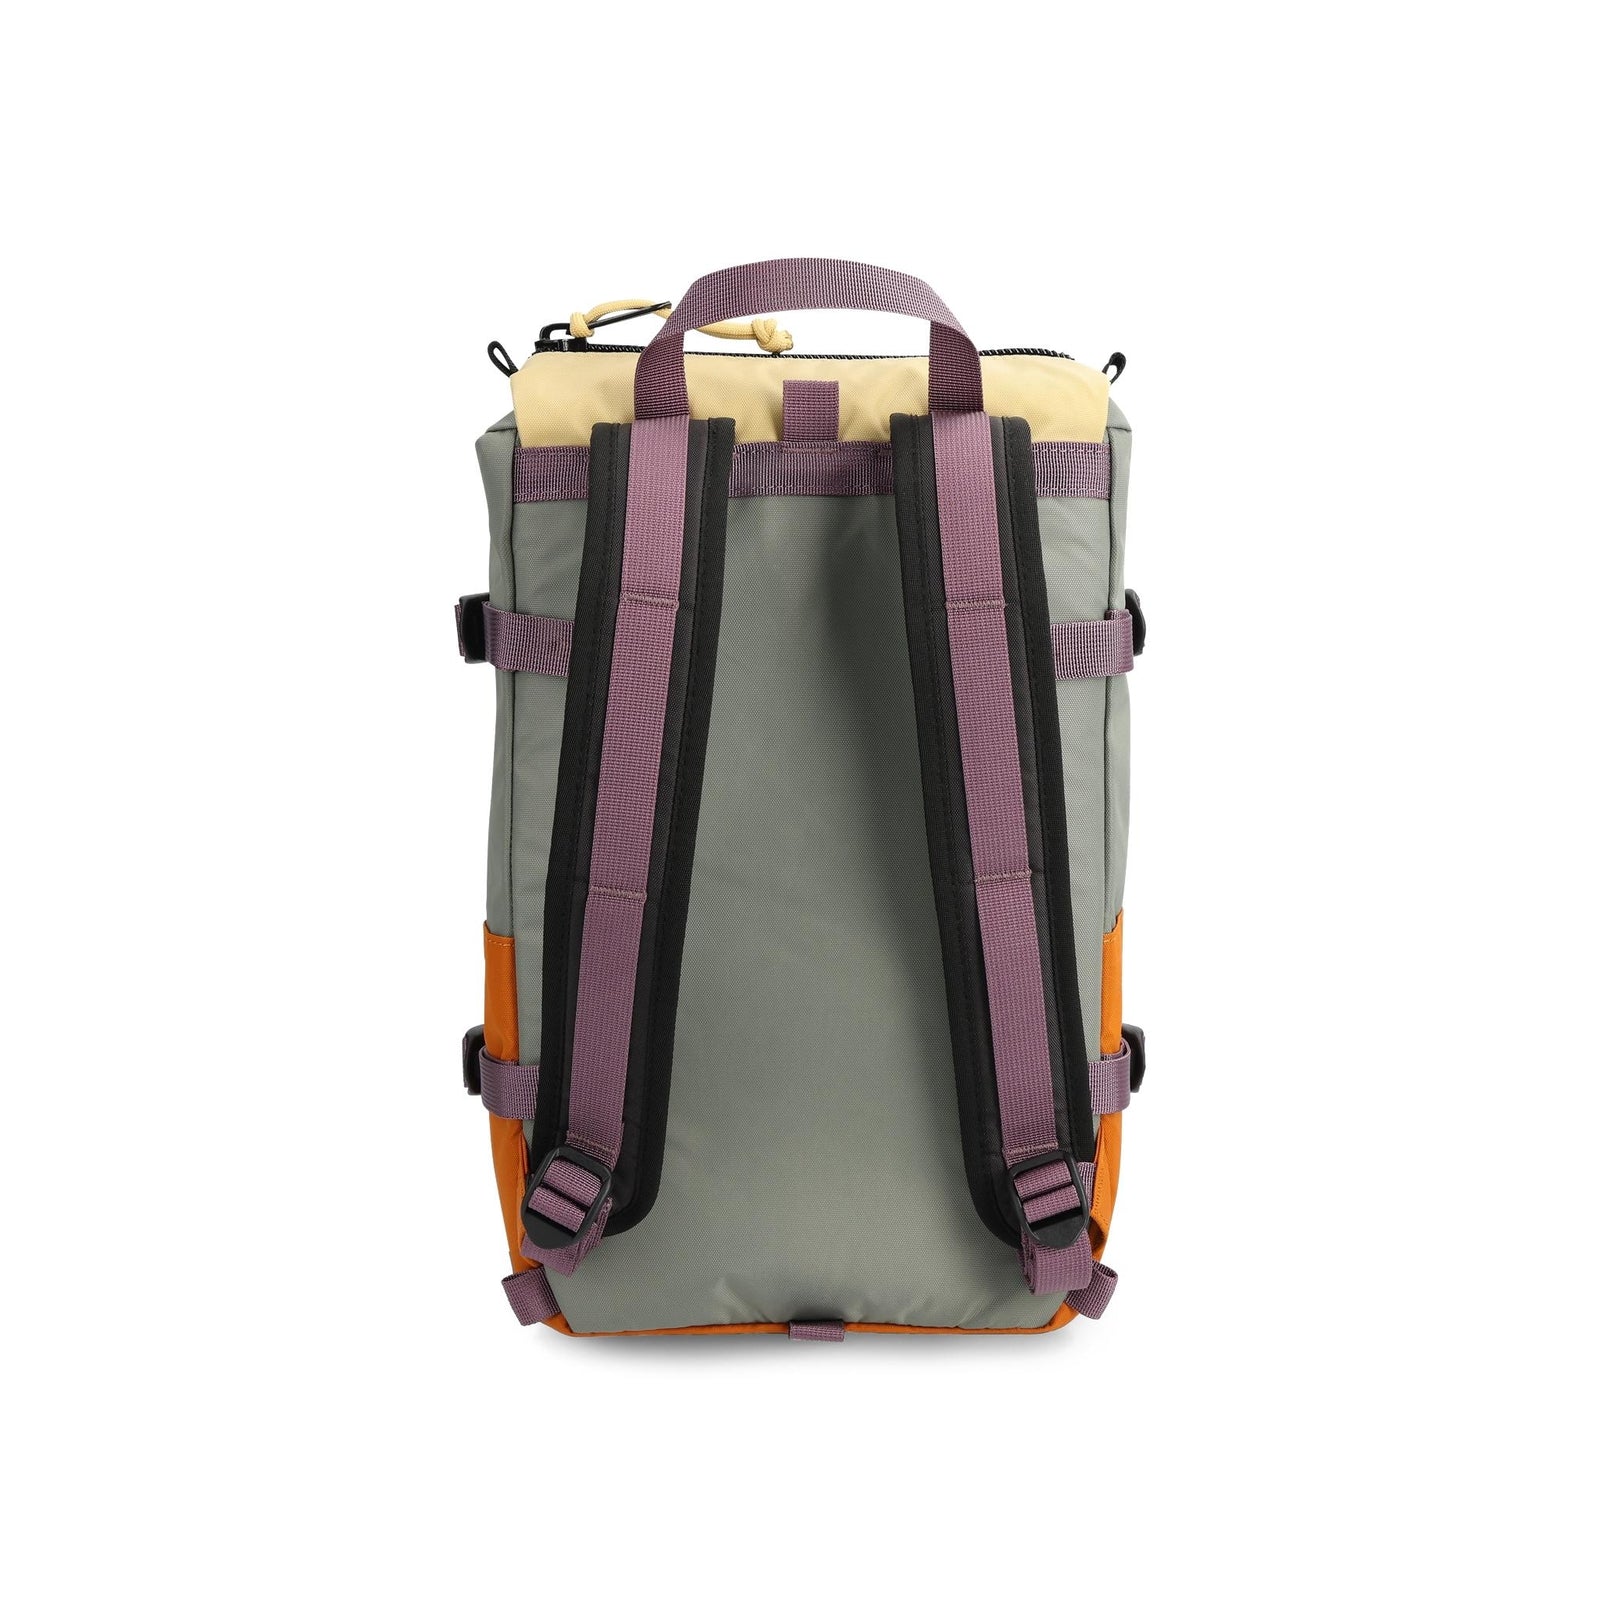 Back View of Topo Designs Rover Pack Mini in "Beetle / Spice"